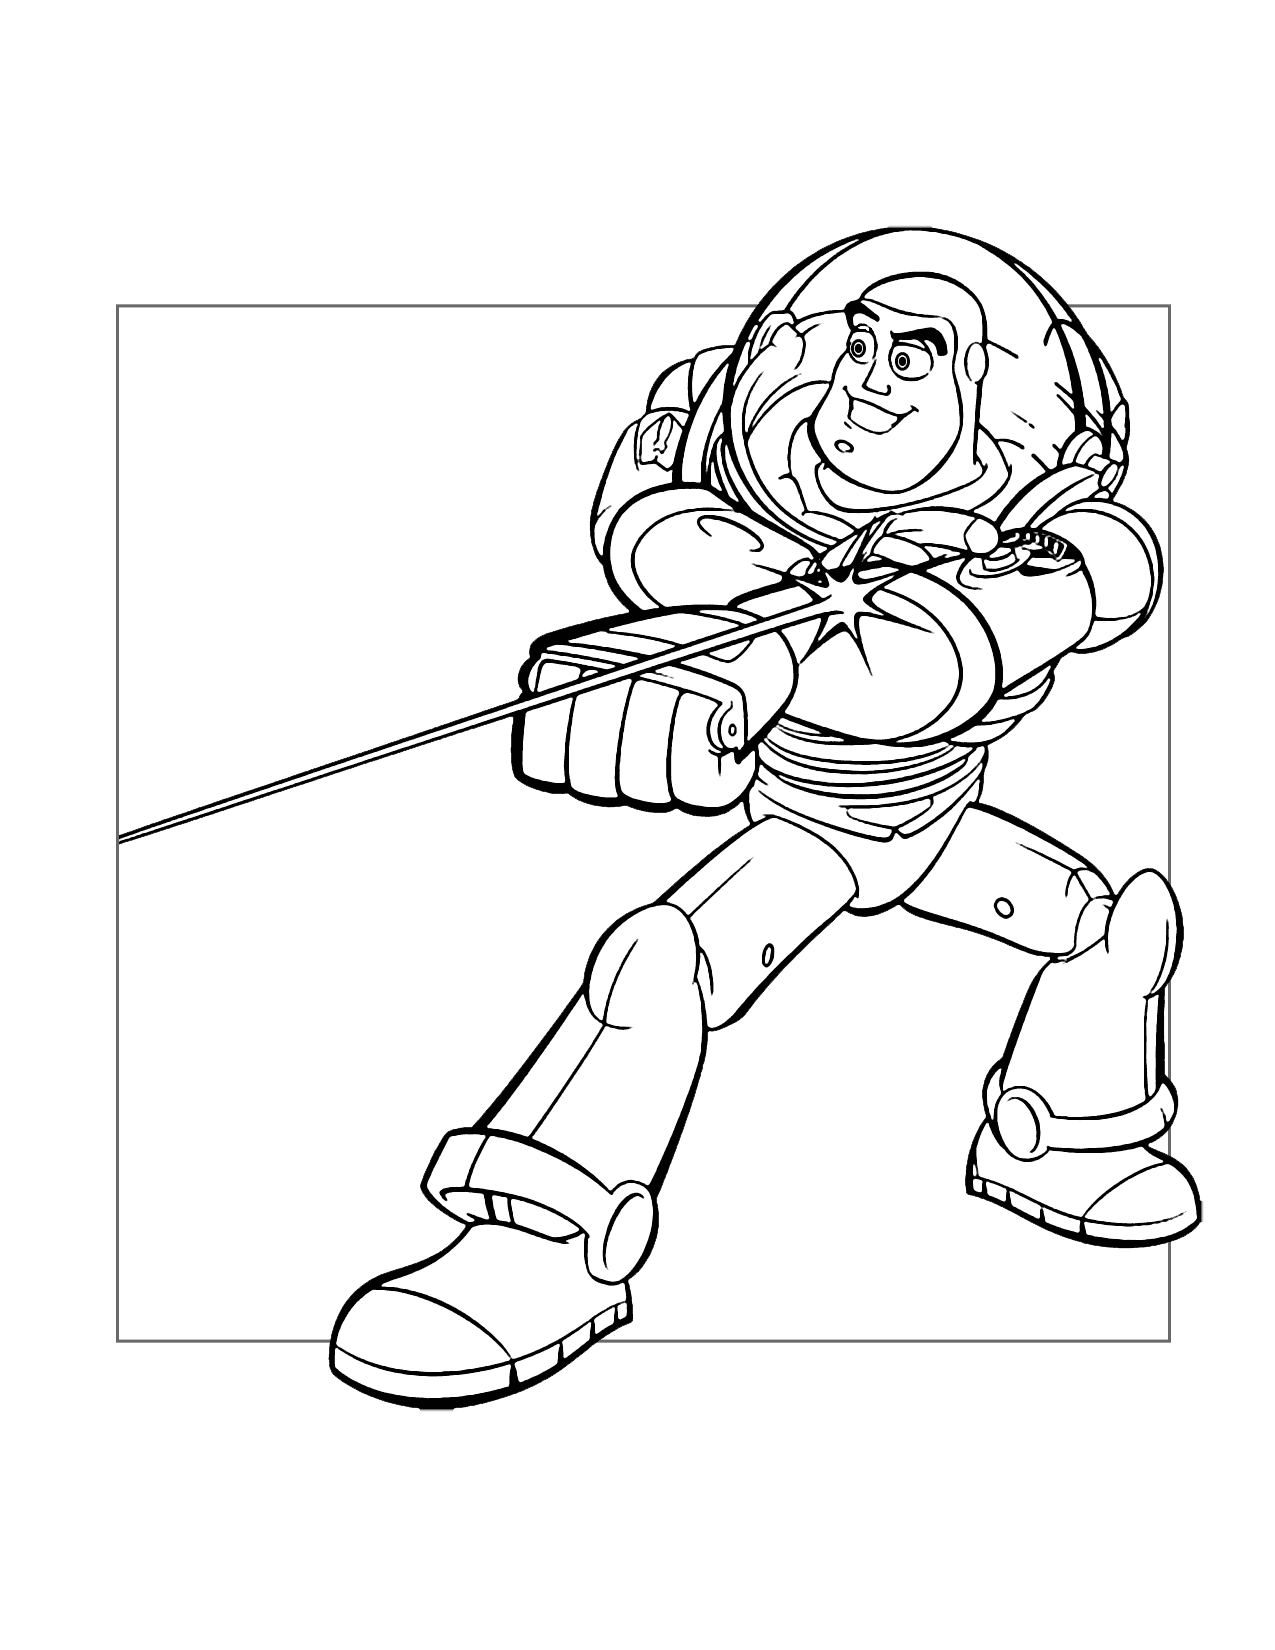 Buzz Lightyear Shooting Laser Coloring Page